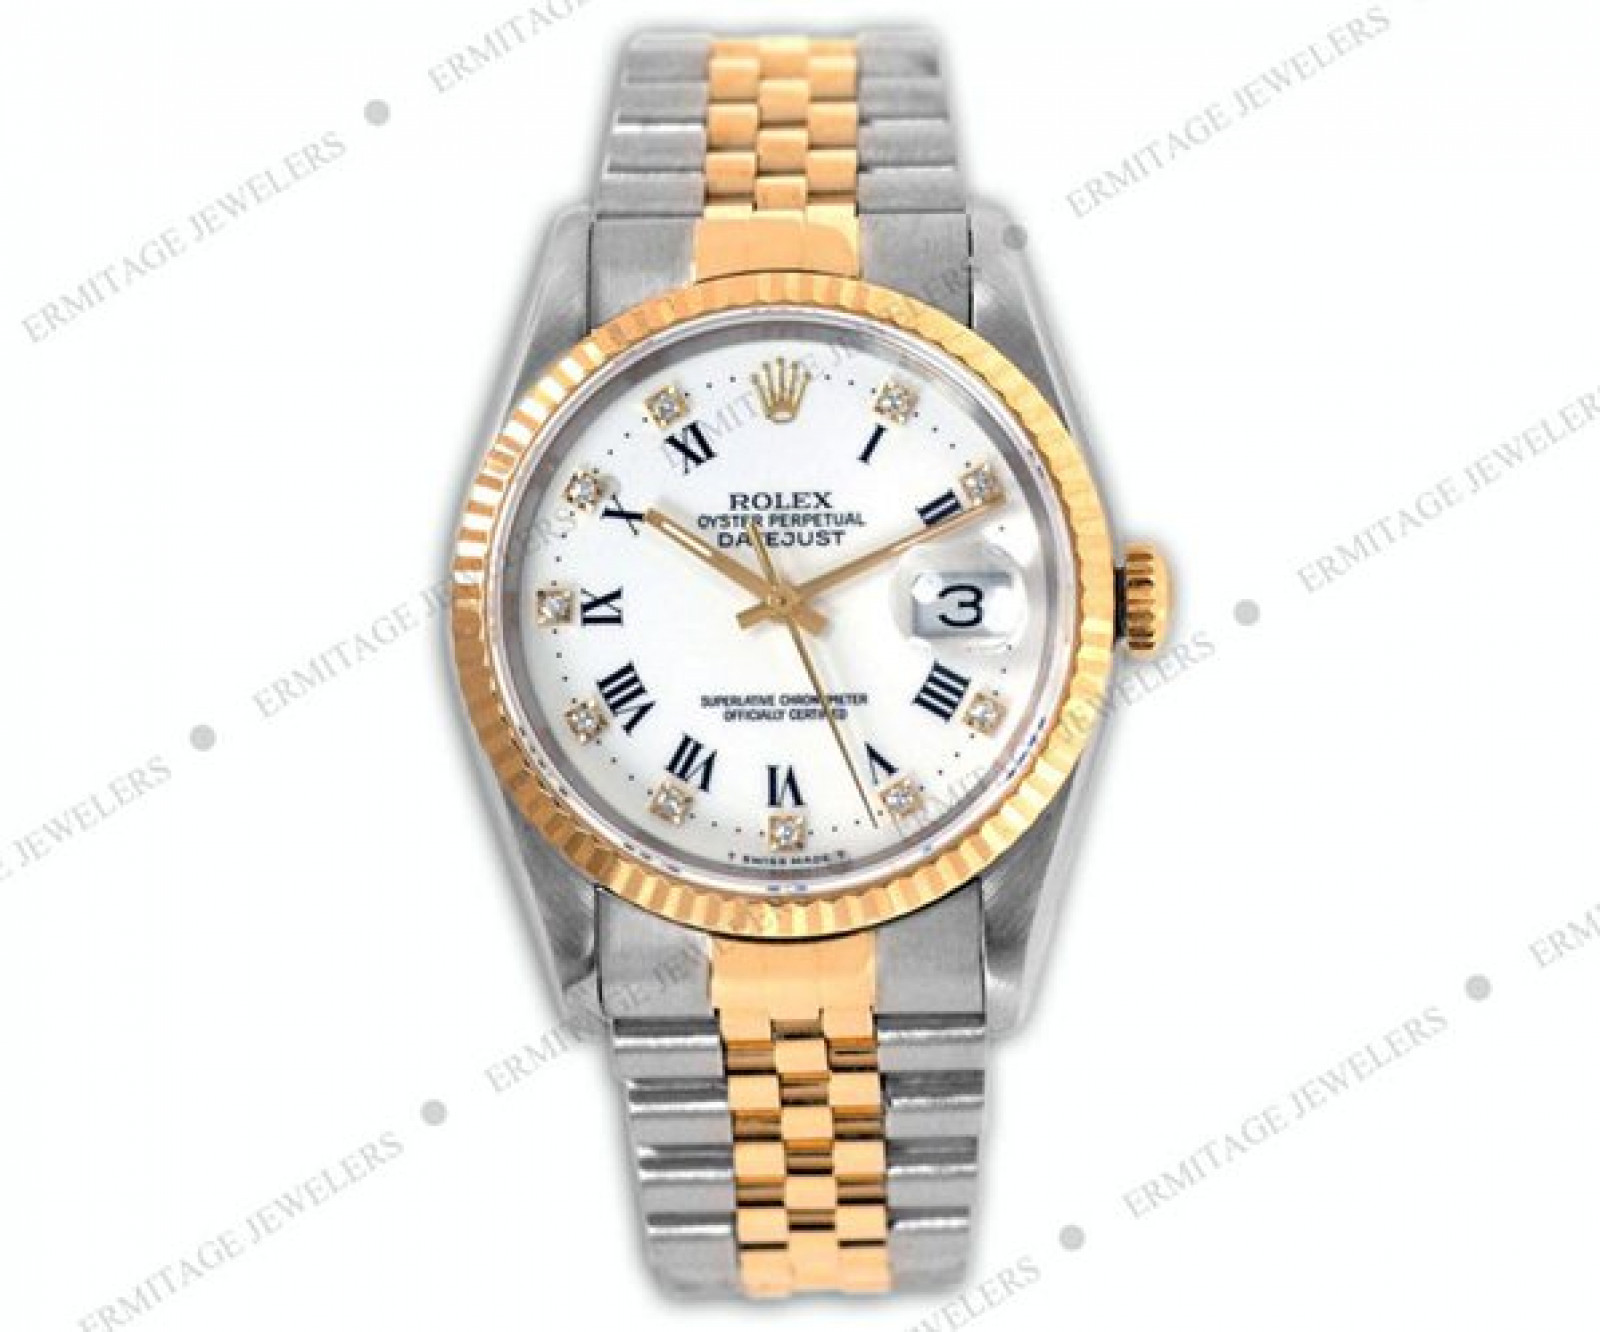 Rolex Datejust 16233 with Diamonds on White Dial